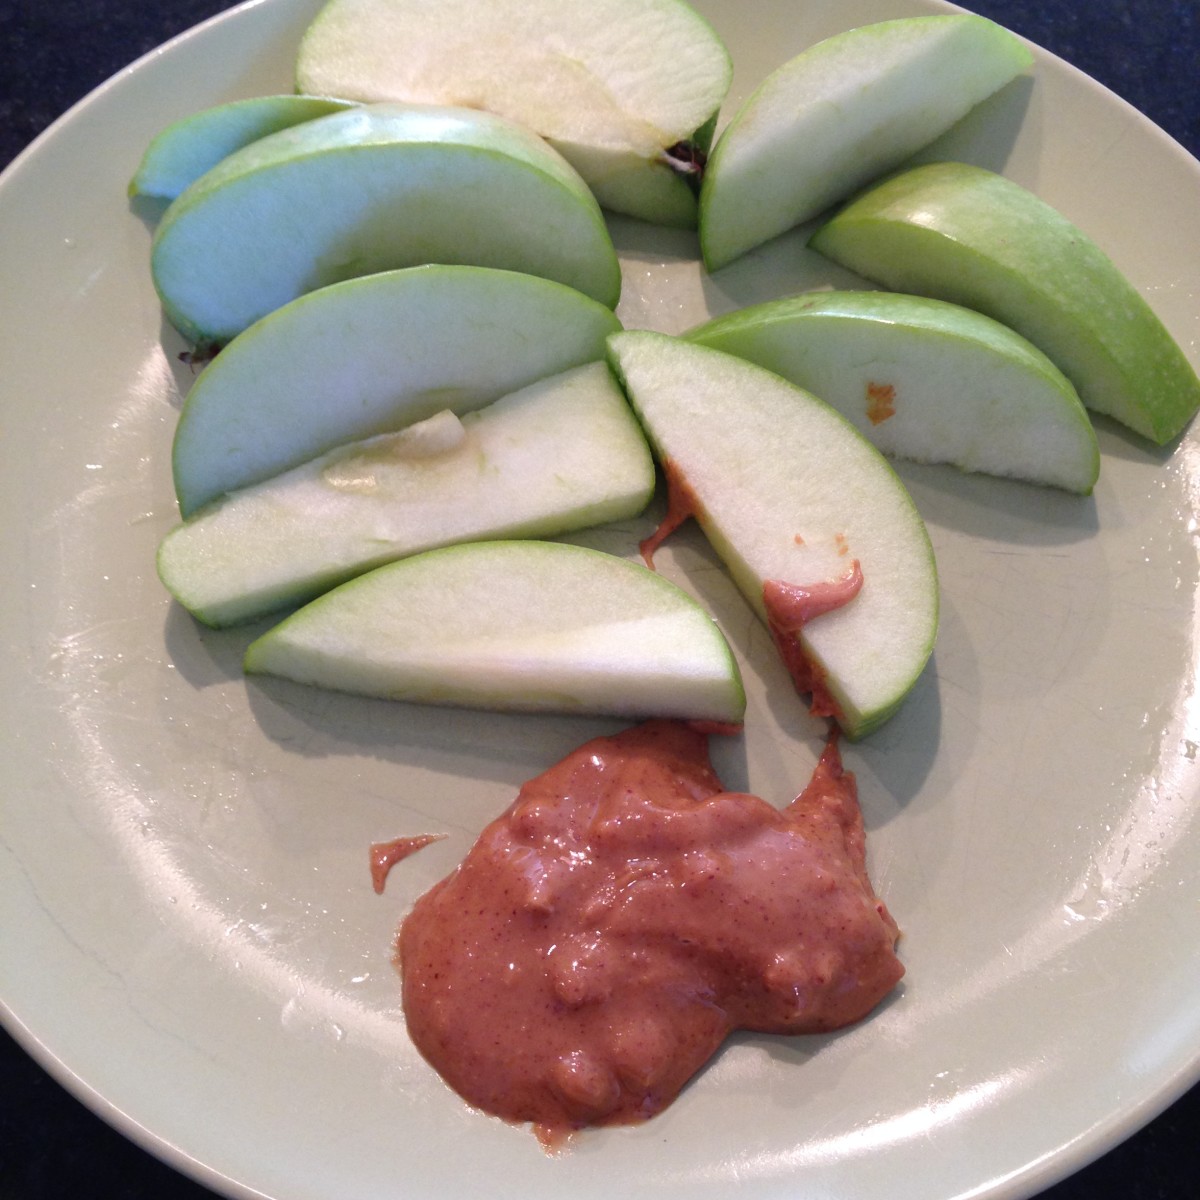 apples and PB